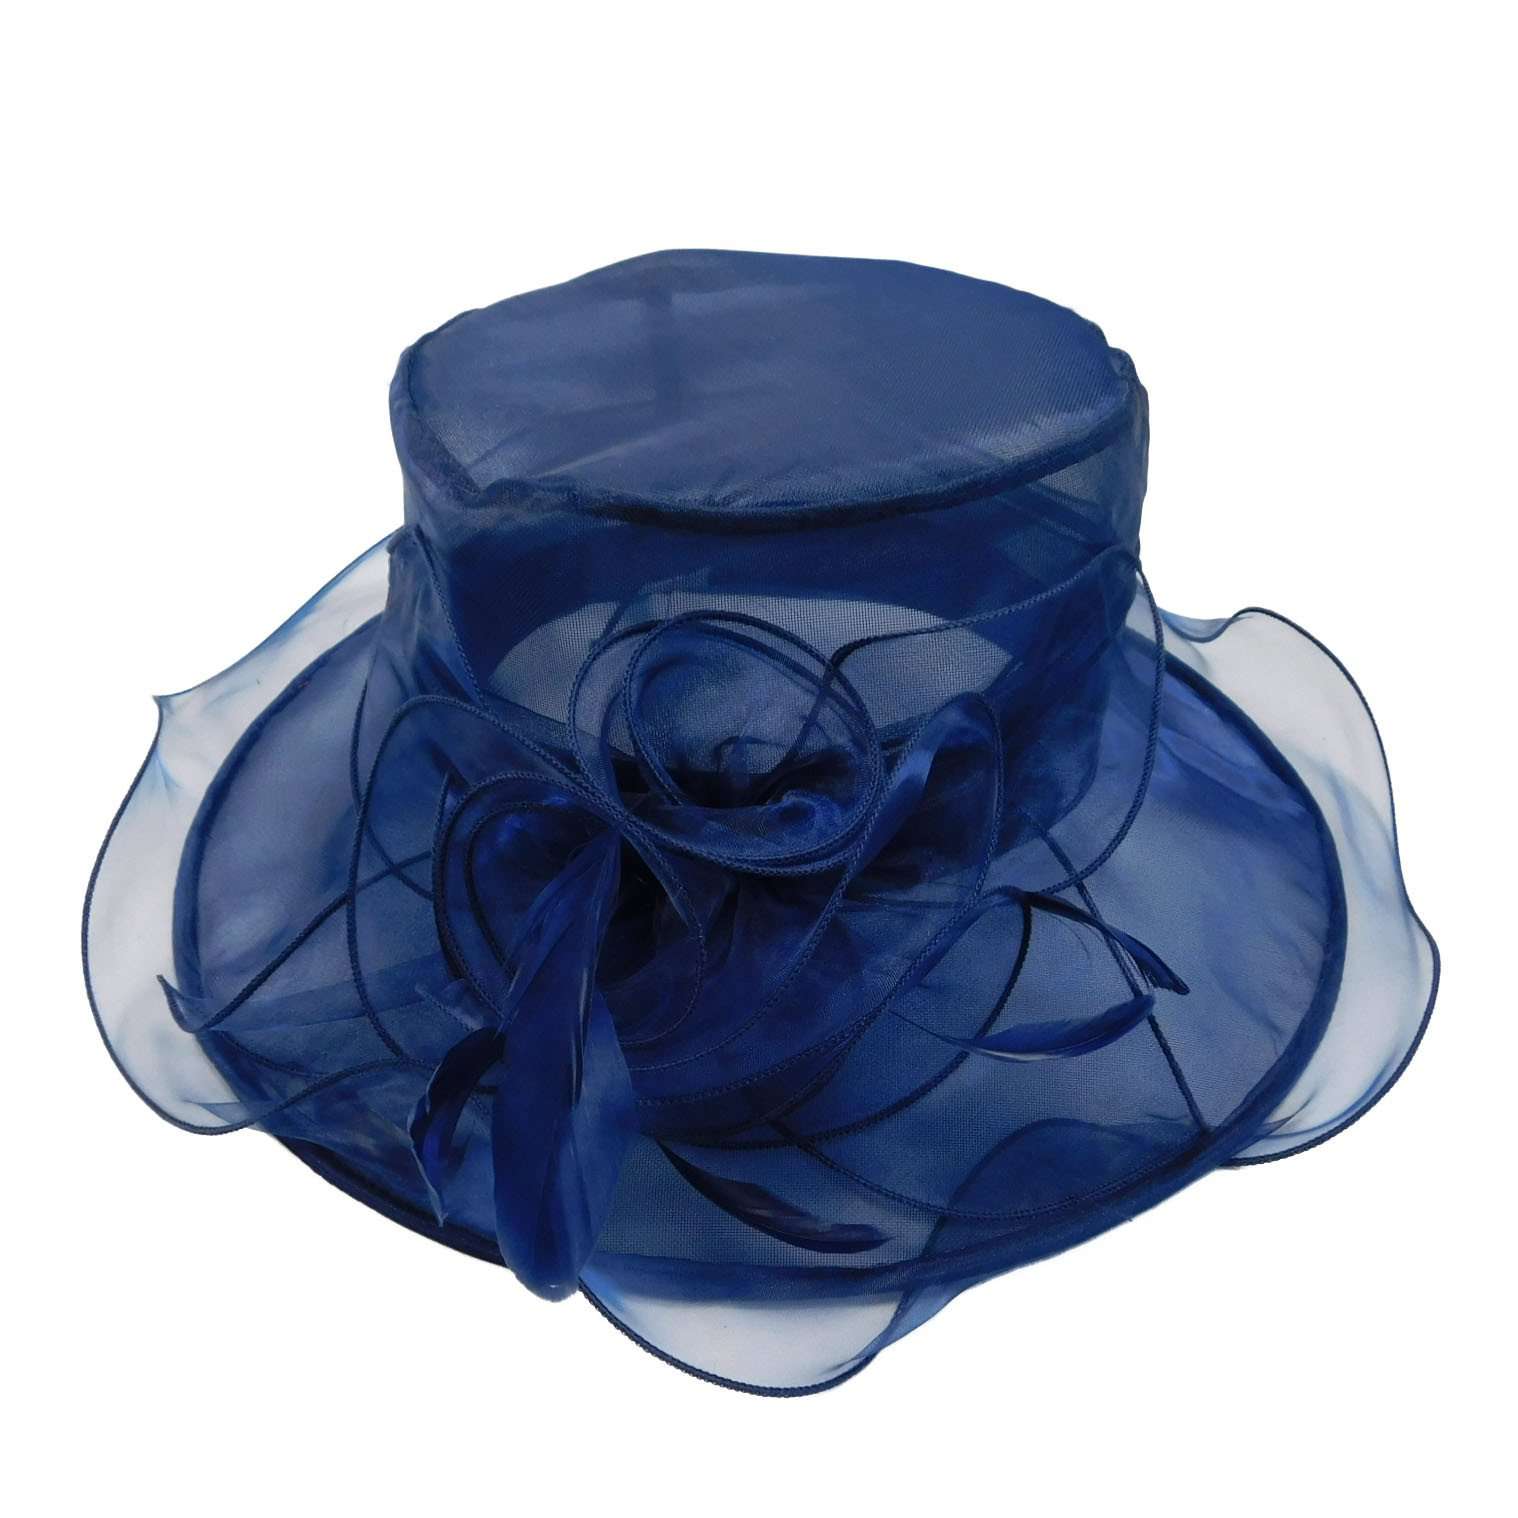 Ruffle Organza Hat with Feathers Dress Hat Jeanne Simmons WSJS6443NV Navy  